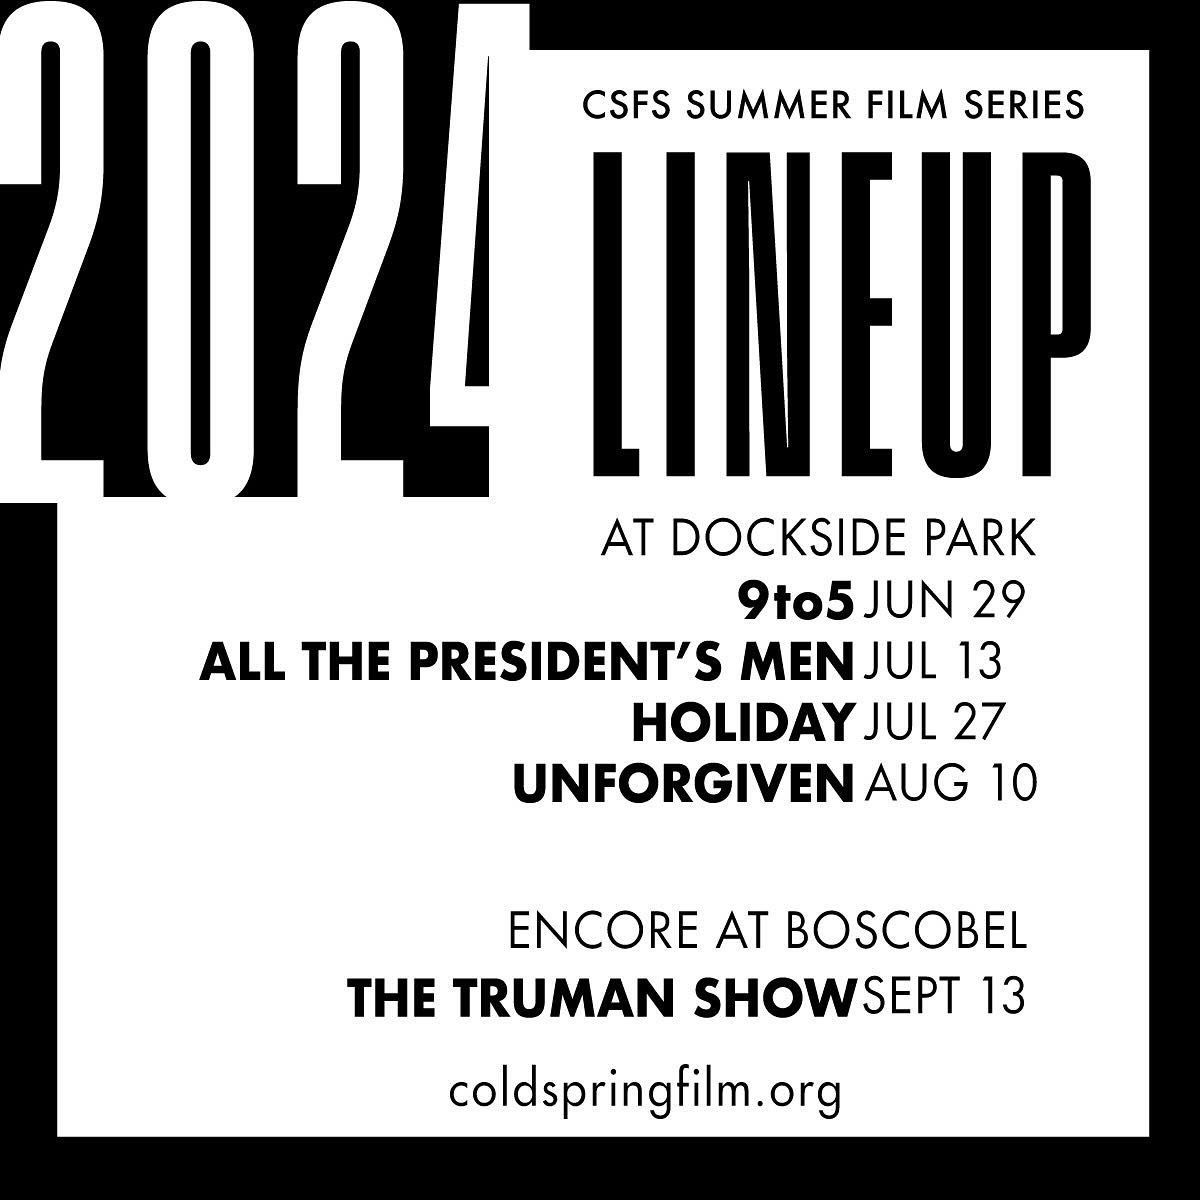 Announcing our 14th season of FREE outdoor films! Please visit coldspringfilm.org for all the info and to support these free screenings. Summer can&rsquo;t come soon enough. See you there!